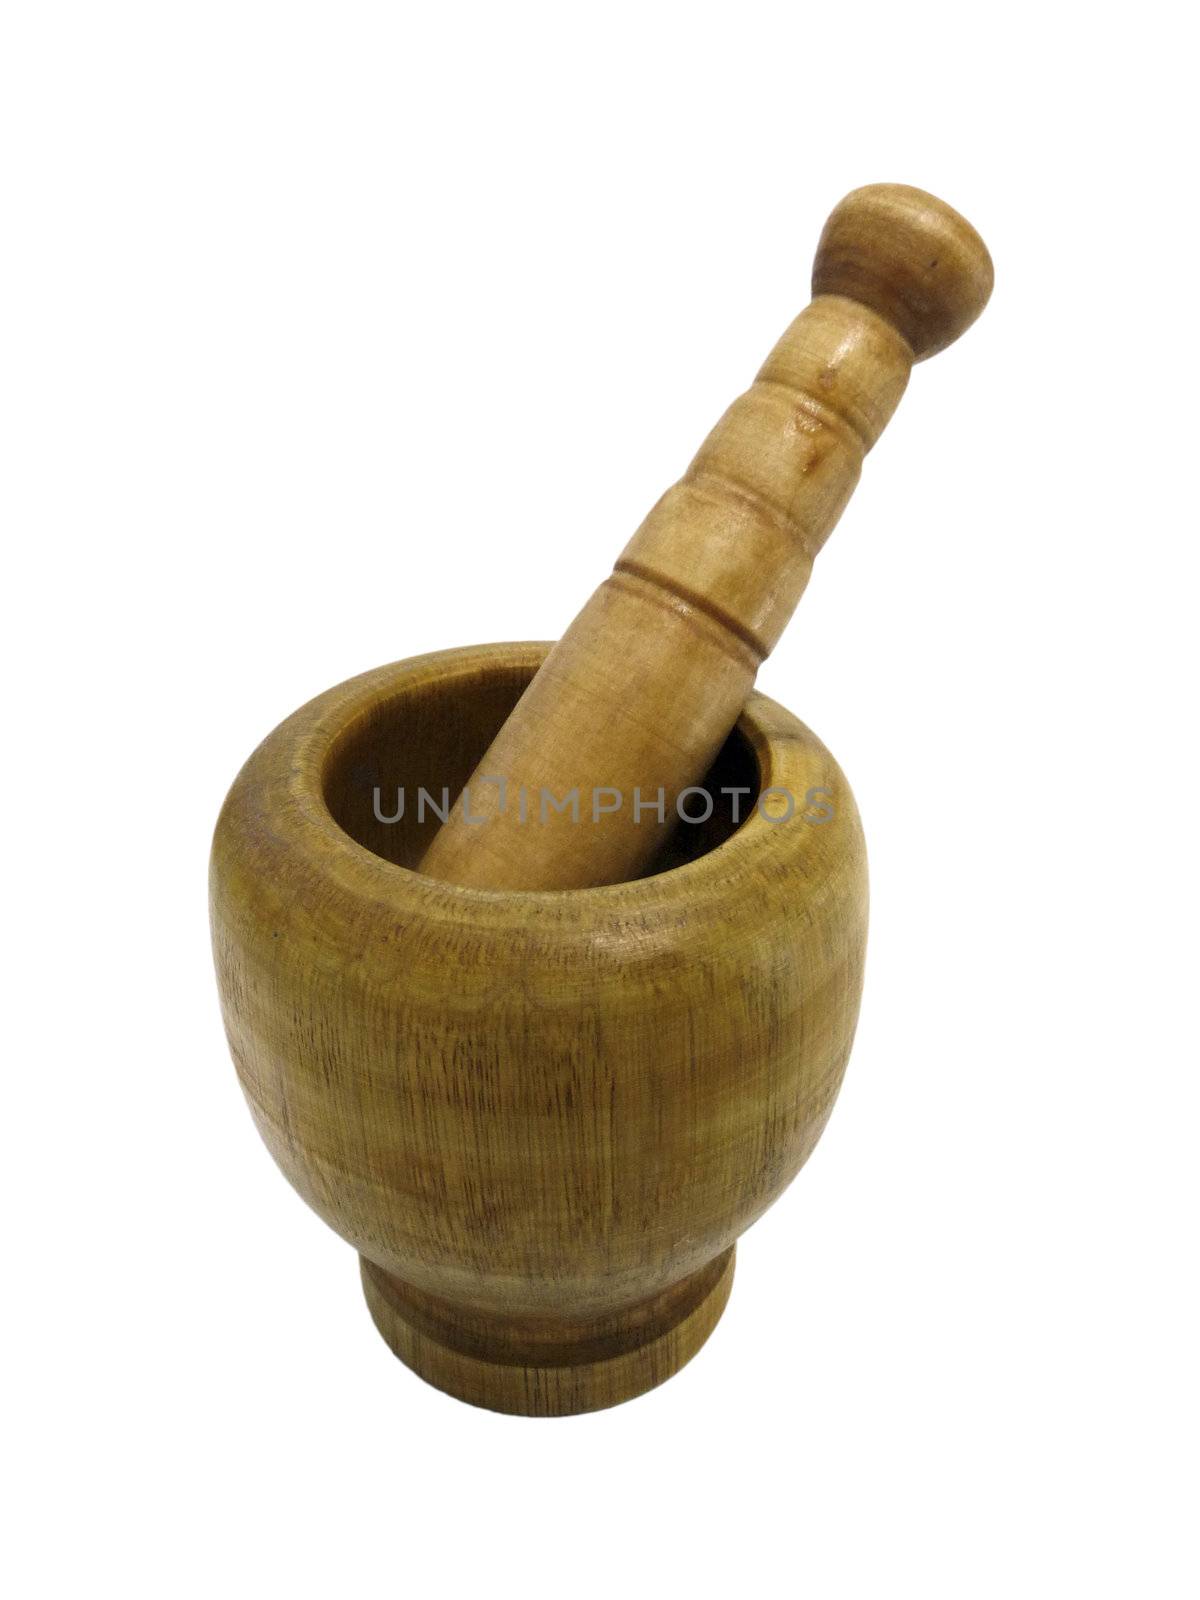 Mortar and pestle by magraphics